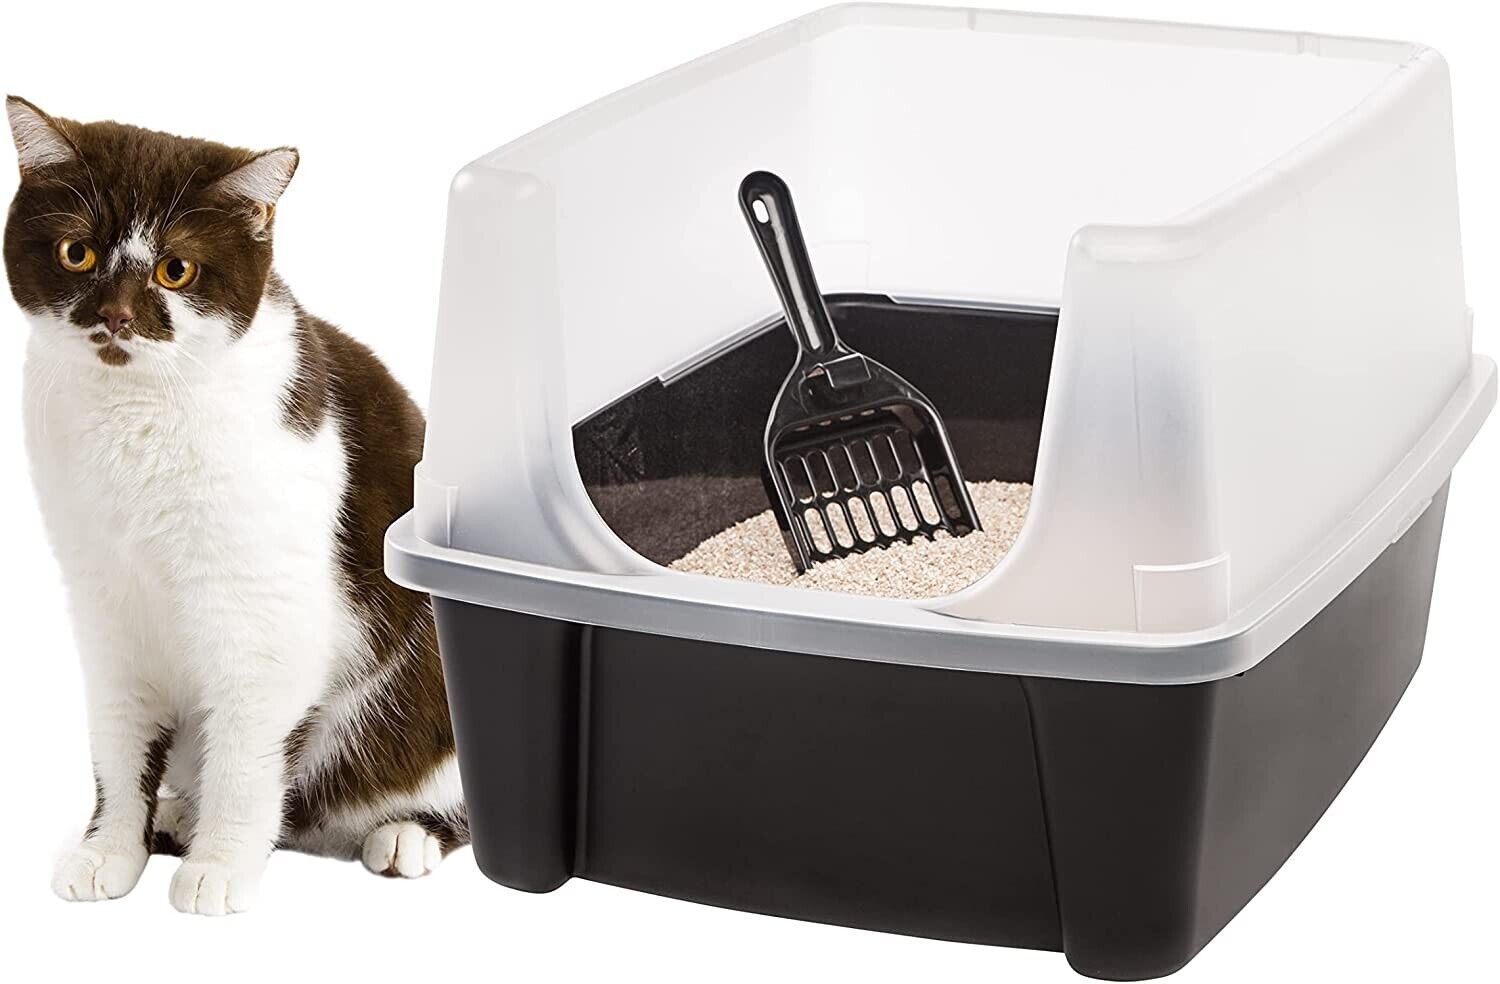 Open-Top IRIS USA Cat Litter Box with Shield and Scoop Enclosed Kitty Pan, Black